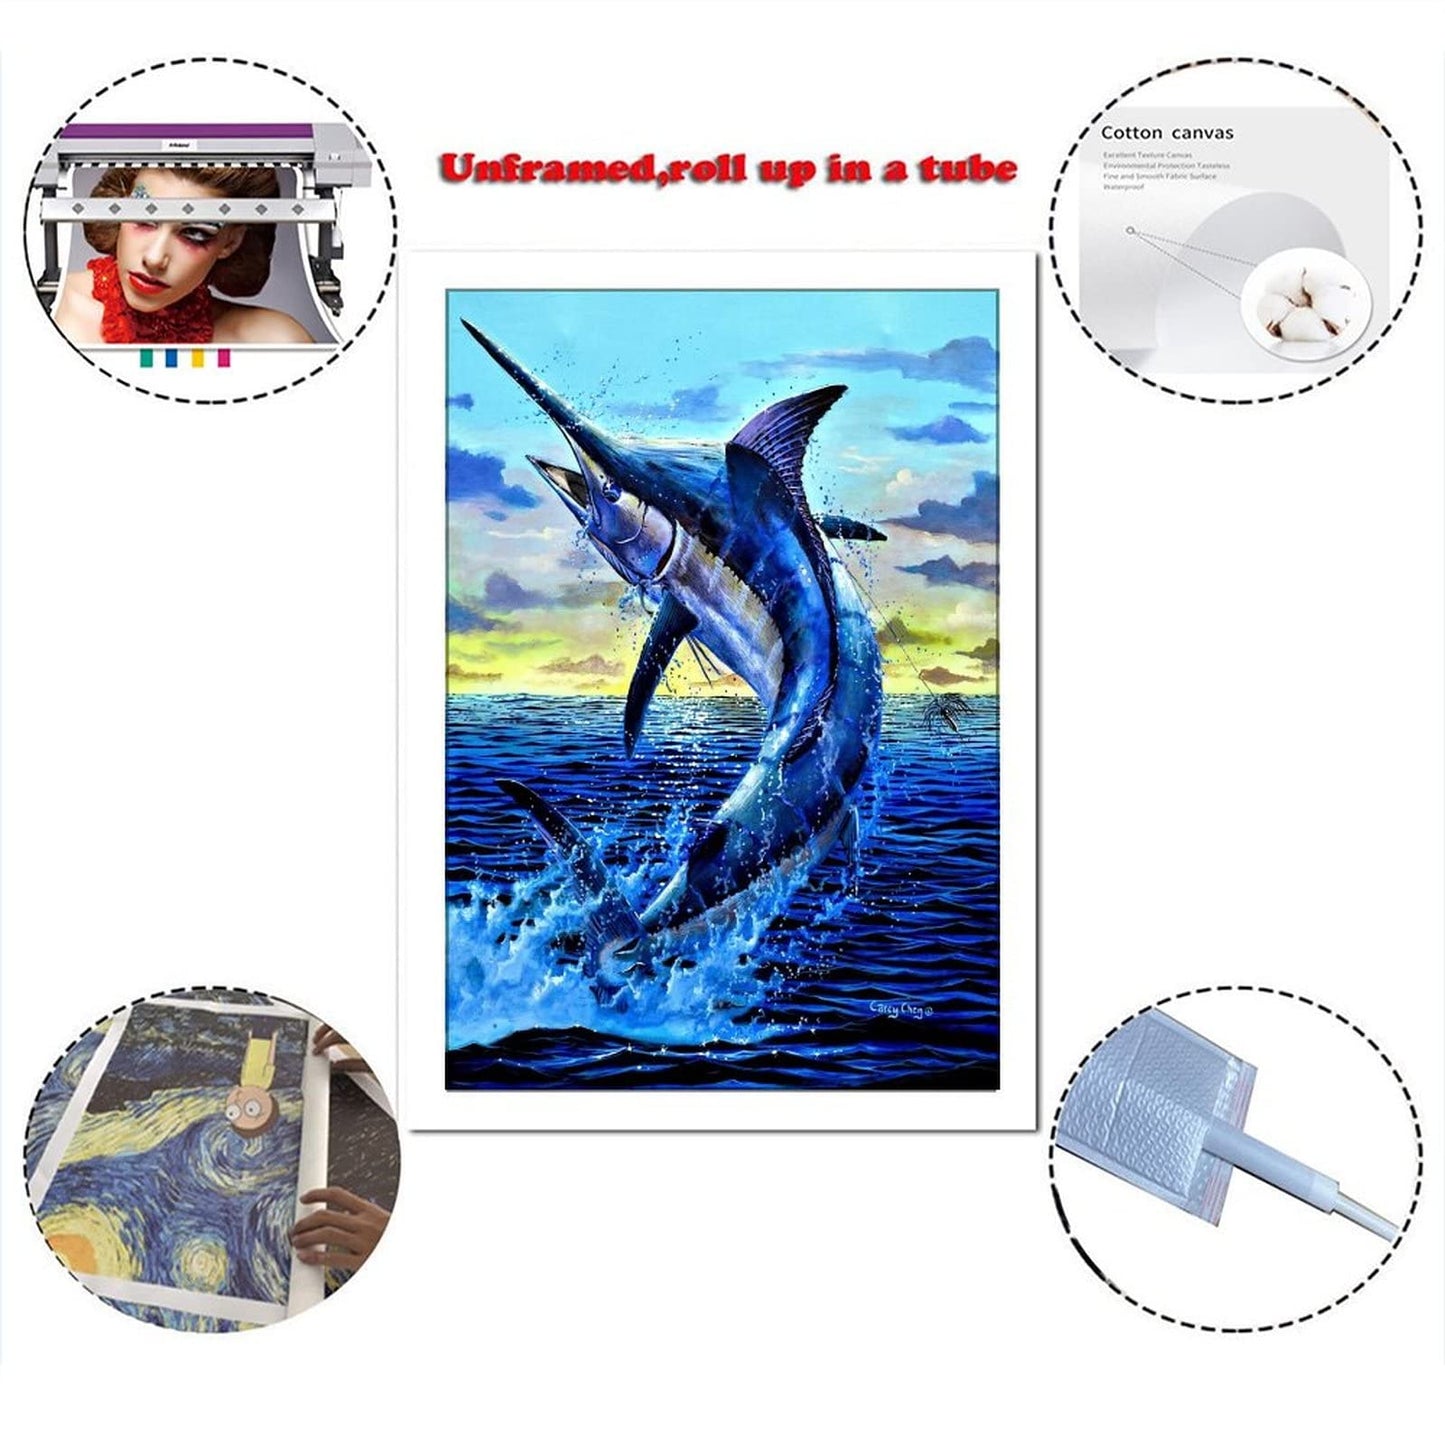 BUUTUUCE Ocean Jumping Blue Marlin Fishing Canvas Art Poster and Wall Art Picture Print Modern Family bedroom Decor Posters 08x12inch(20x30cm)